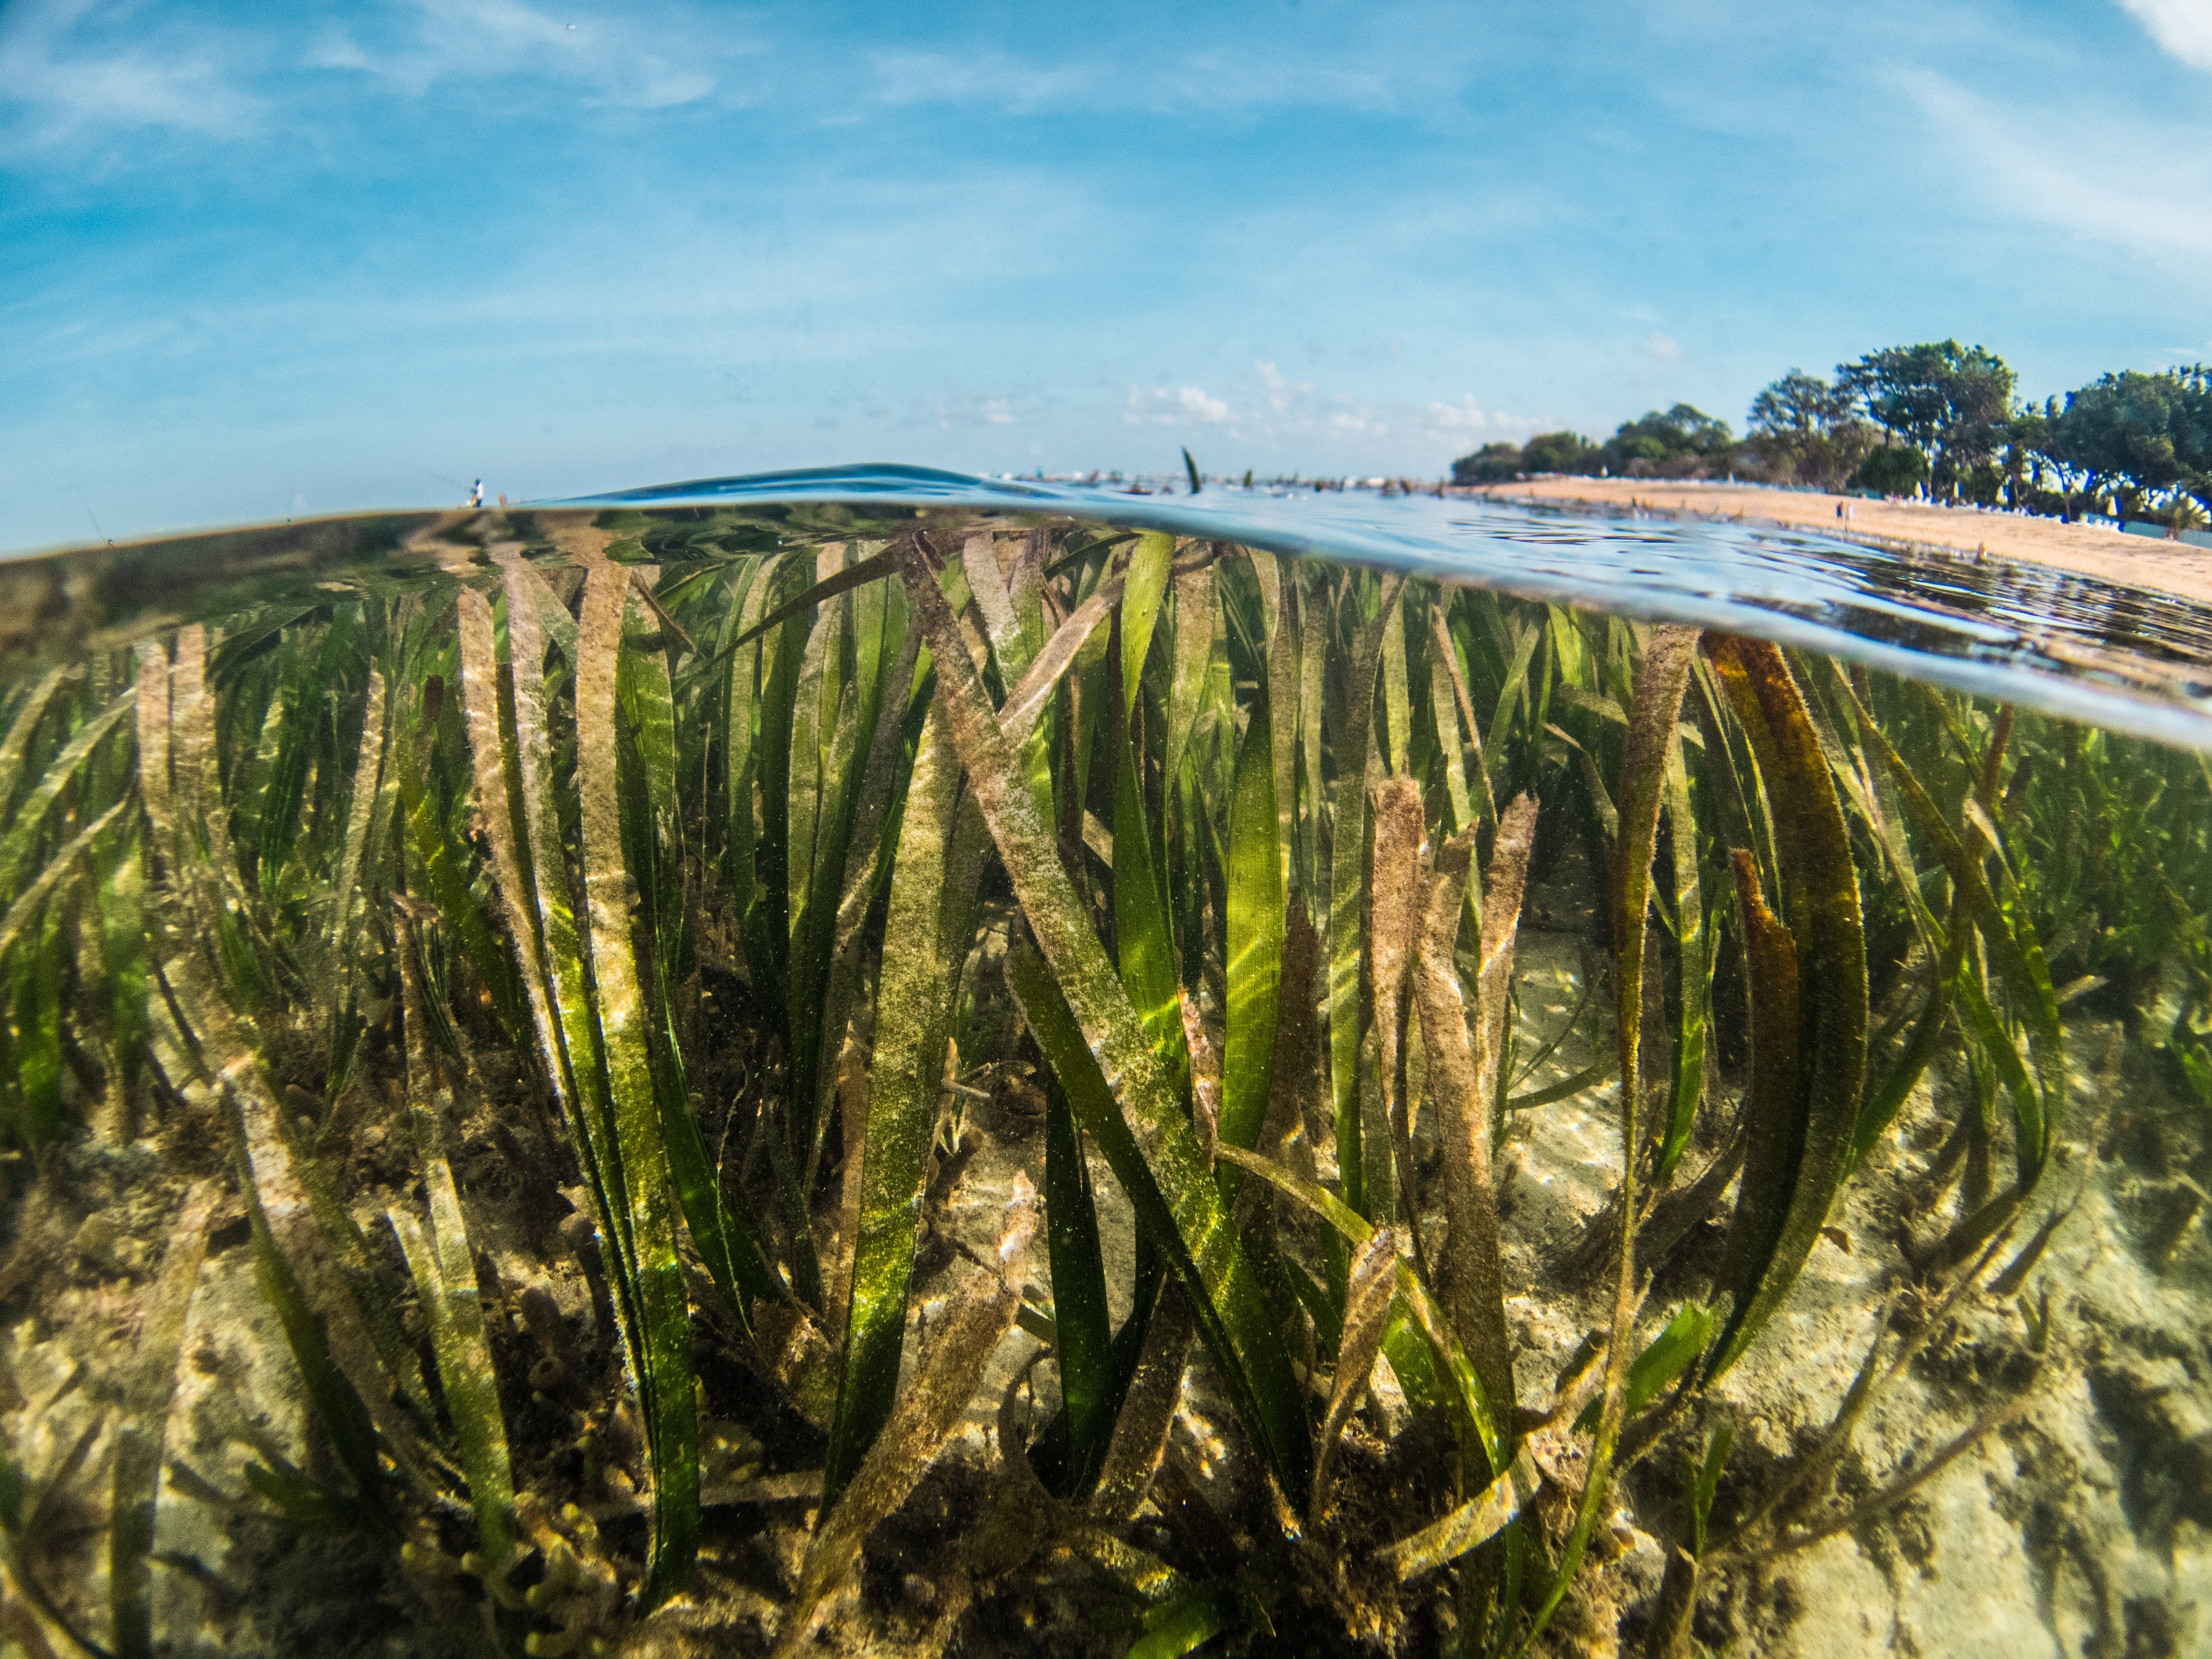 #ProtectOurBeds campaign sees major contributors come forward, enhancing global seagrass protection